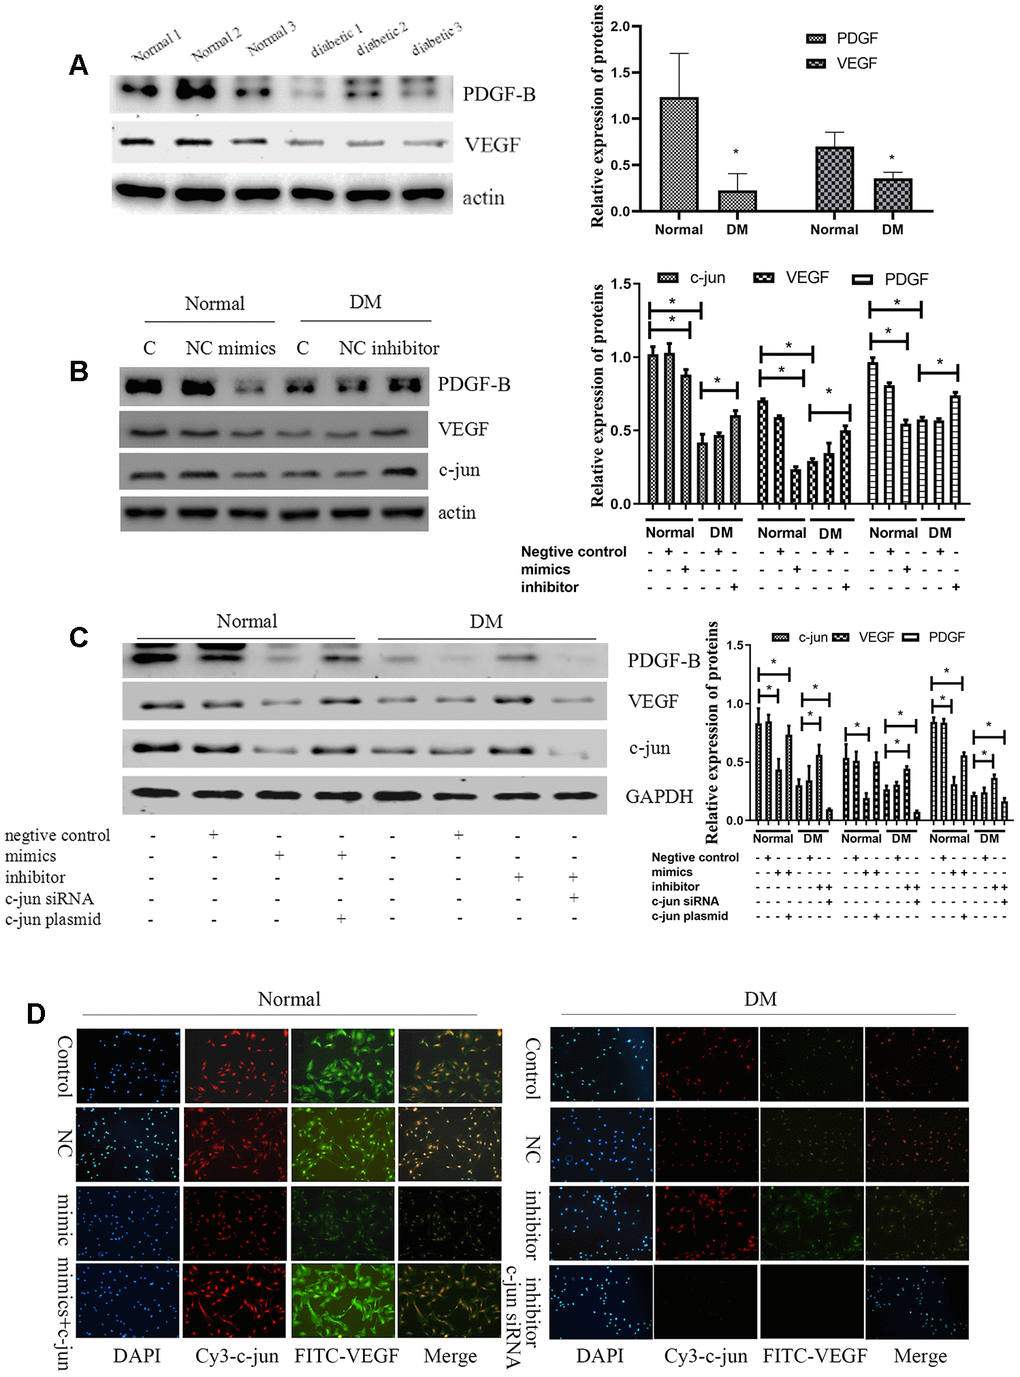 MiR-139-5p inhibits VEGF expression by c-jun to inhibit the function of ECFCs. (A) PDGF-B and VEGF expression detected by Western blot in healthy and diabetic subjects. (N=3) *P B) C-jun, VEGF, and PDGF-B expression in normal ECFCs transfected with miR-139-5p mimics and diabetic ECFCs transfected with a miR-139-5p inhibitors. (N=3) *P C) C-jun, VEGF, and PDGF-B expression was detected when normal ECFCs were transfected with miR-139-5p mimics and c-jun plasmids and diabetic ECFCs were transfected with miR-139-5p inhibitors and c-jun siRNA. (N=3) *P D) C-jun and VEGF expression was detected in normal ECFCs co-transfected with miR-139-5p mimics and c-jun plasmid, whereas diabetic ECFCs were co-transfected with miR-139-5p inhibitors and c-jun siRNA. The immunofluorescence was used to identify the c-jun and VEGF expression. Red indicates Cy3-labeled c-jun and green indicate FITC-labeled VEGF. The photos were captured by a 40X fluorescence microscope. (N=3) *P 